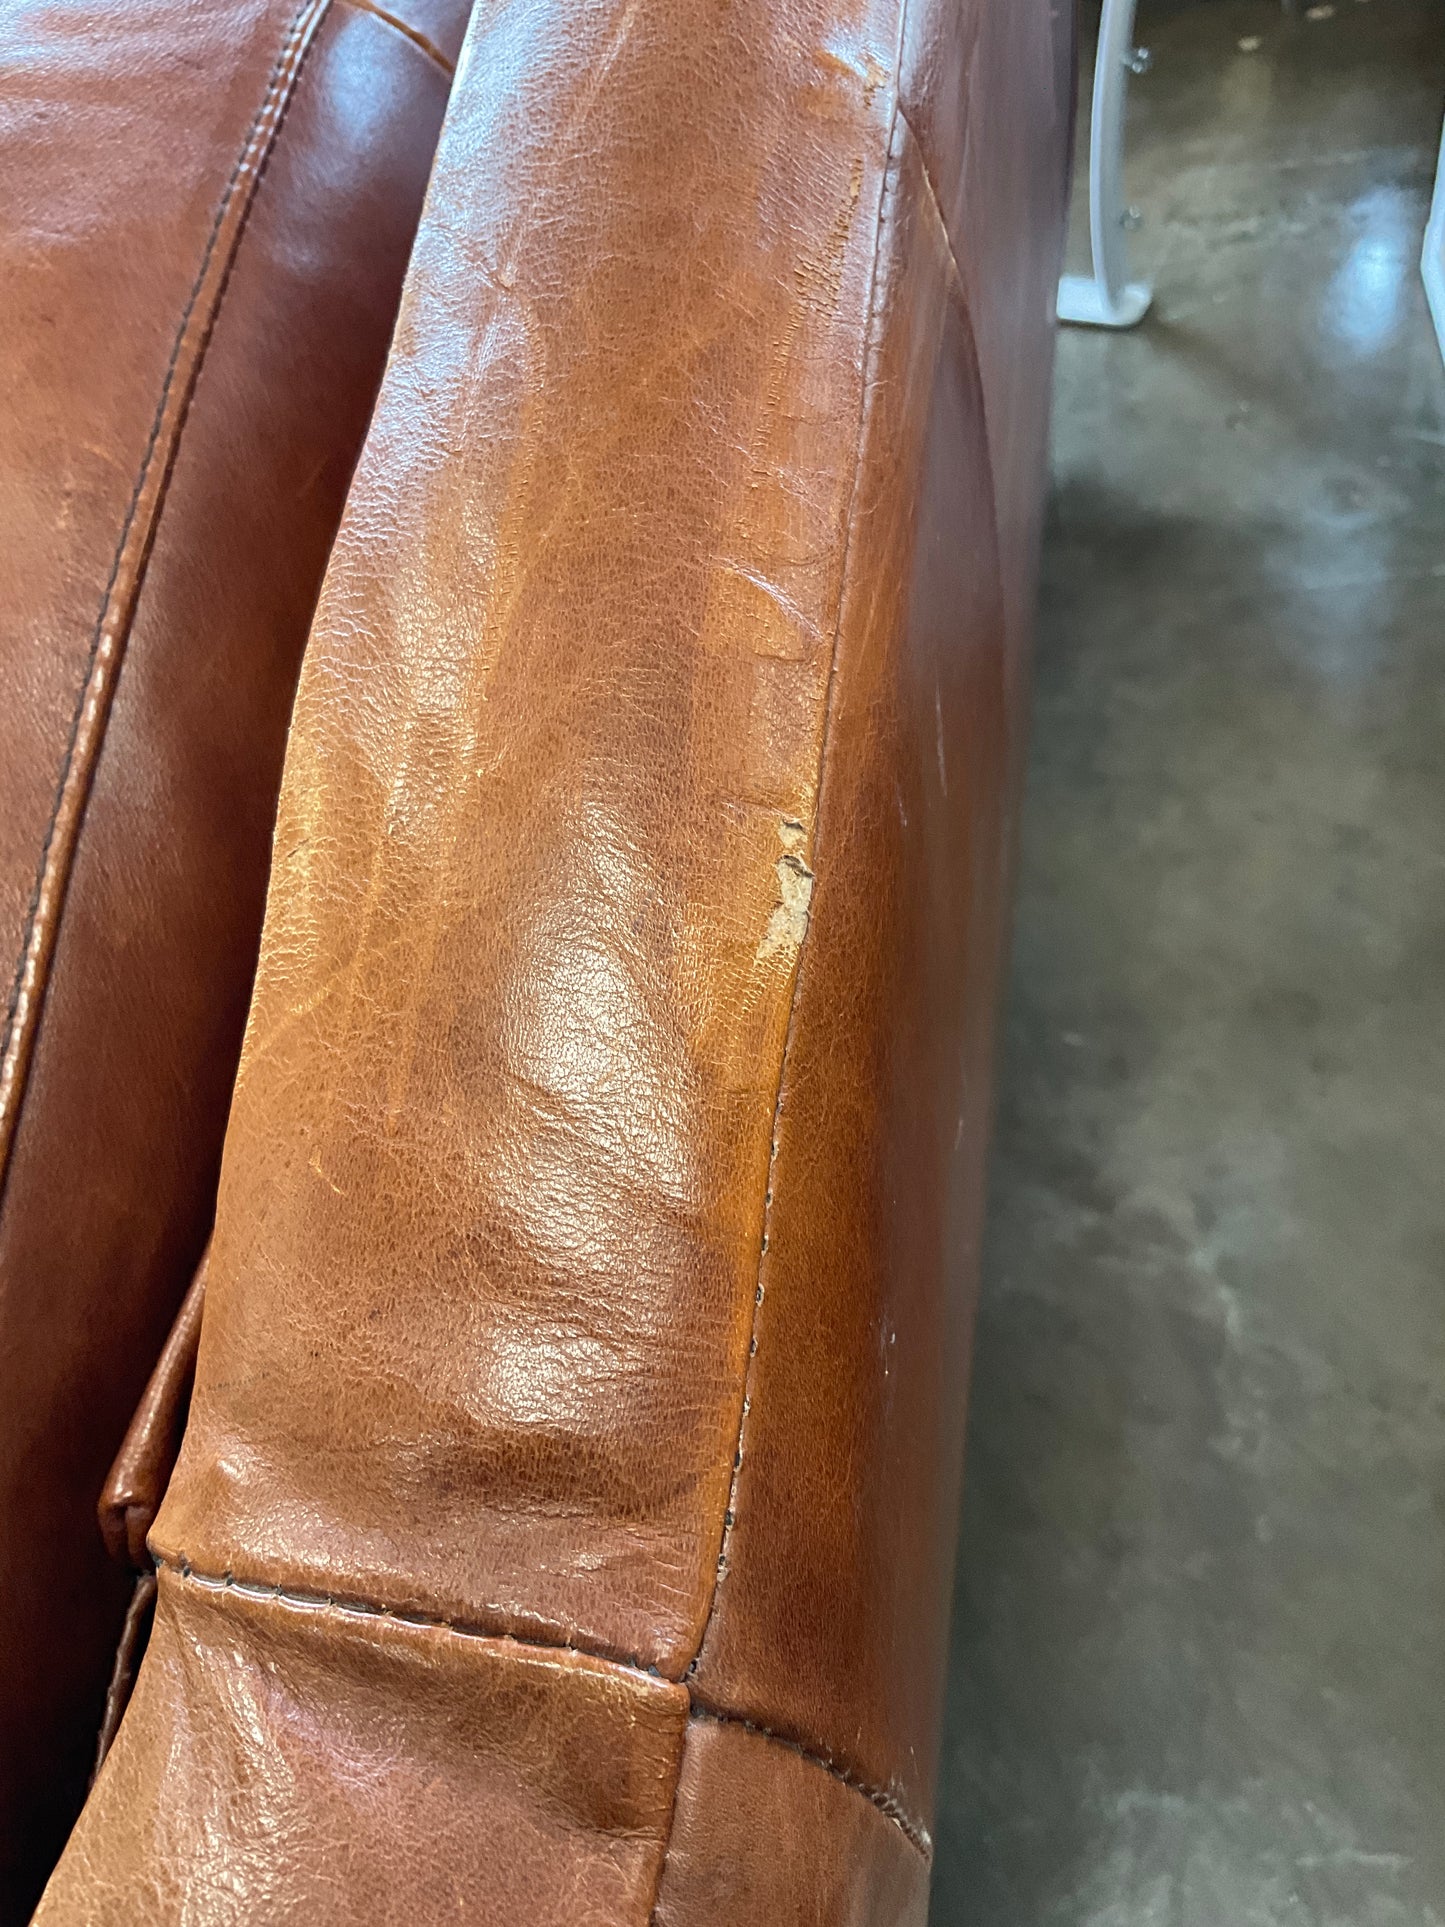 Leather Loveseat **AT OUR 1ST STREET LOCATION**